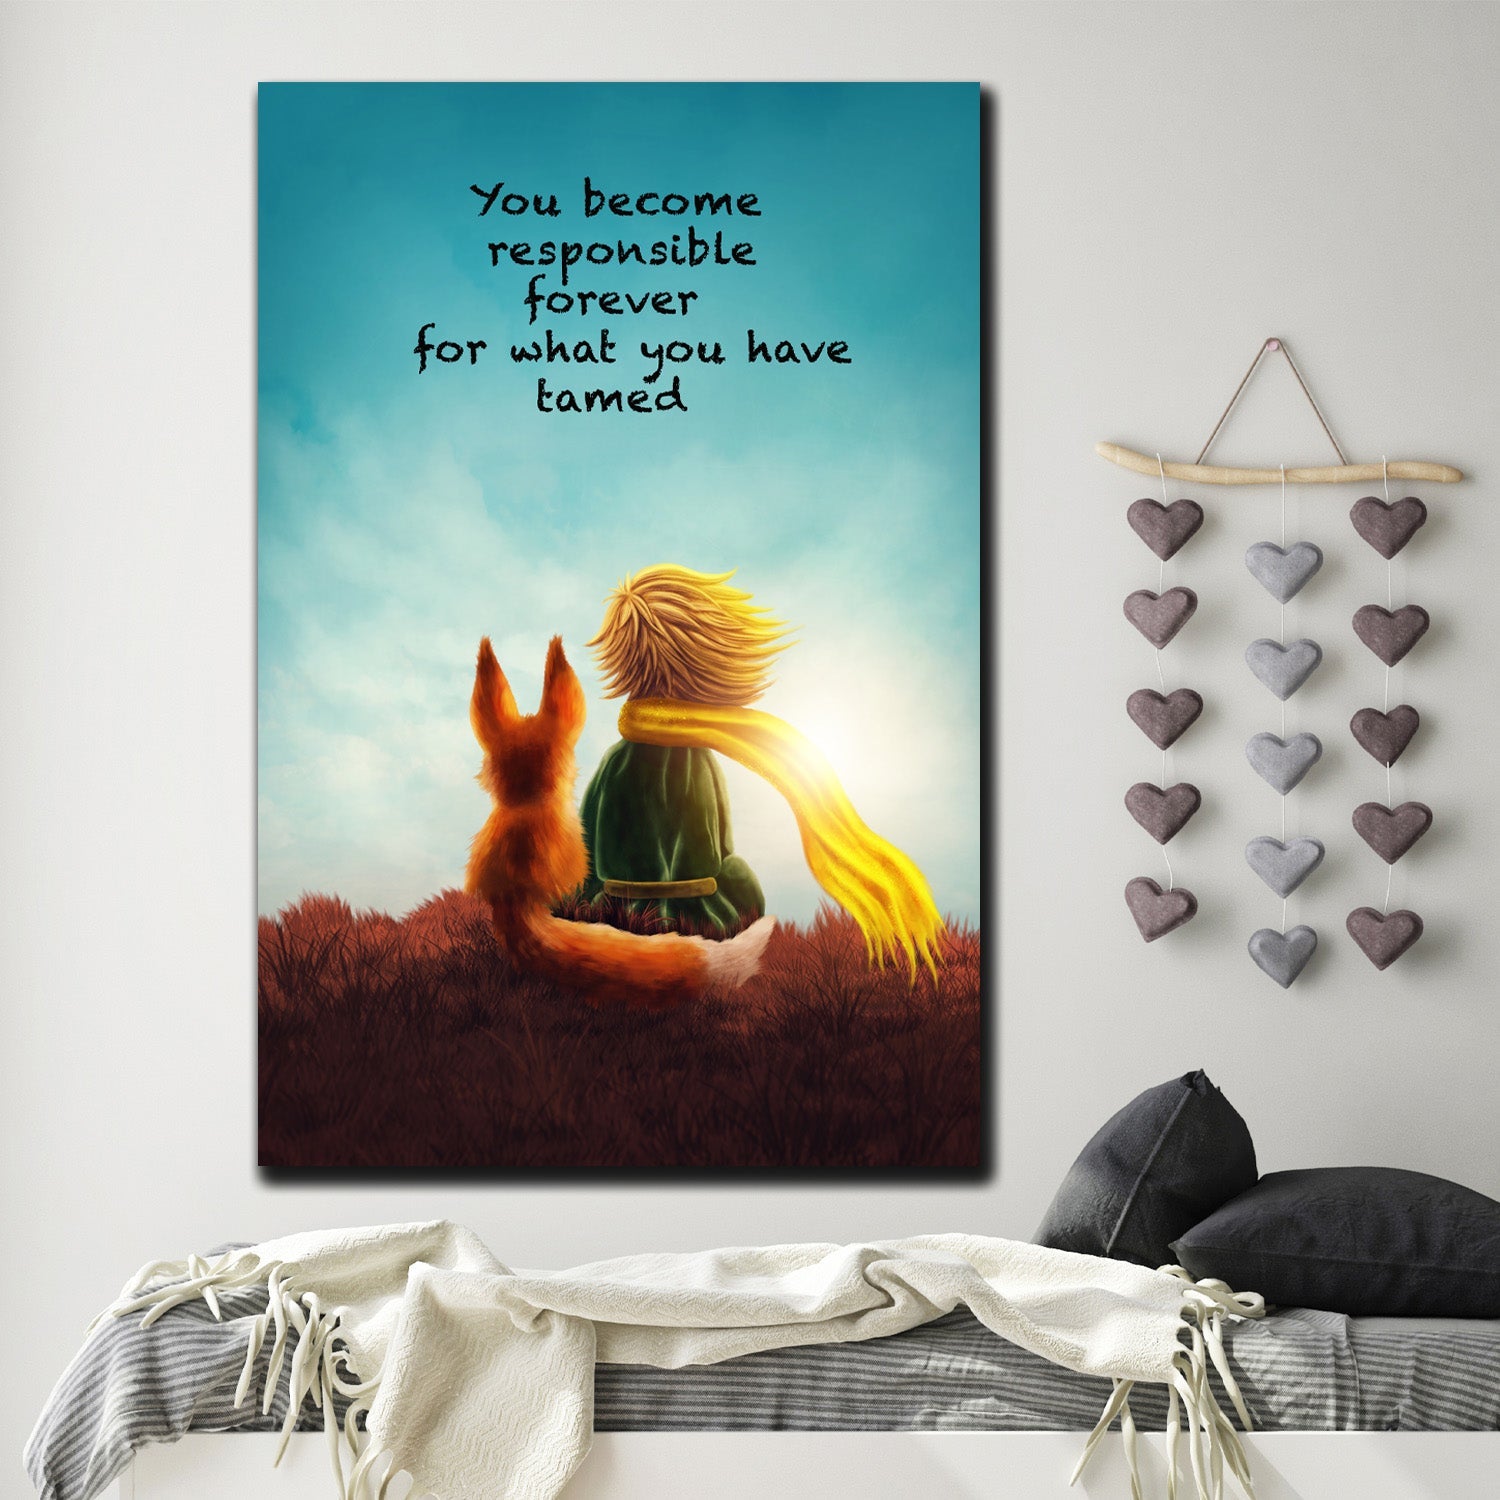 https://cdn.shopify.com/s/files/1/0387/9986/8044/products/TheFoxQuotefromTheLittlePrinceCanvasArtprintStretched-1.jpg